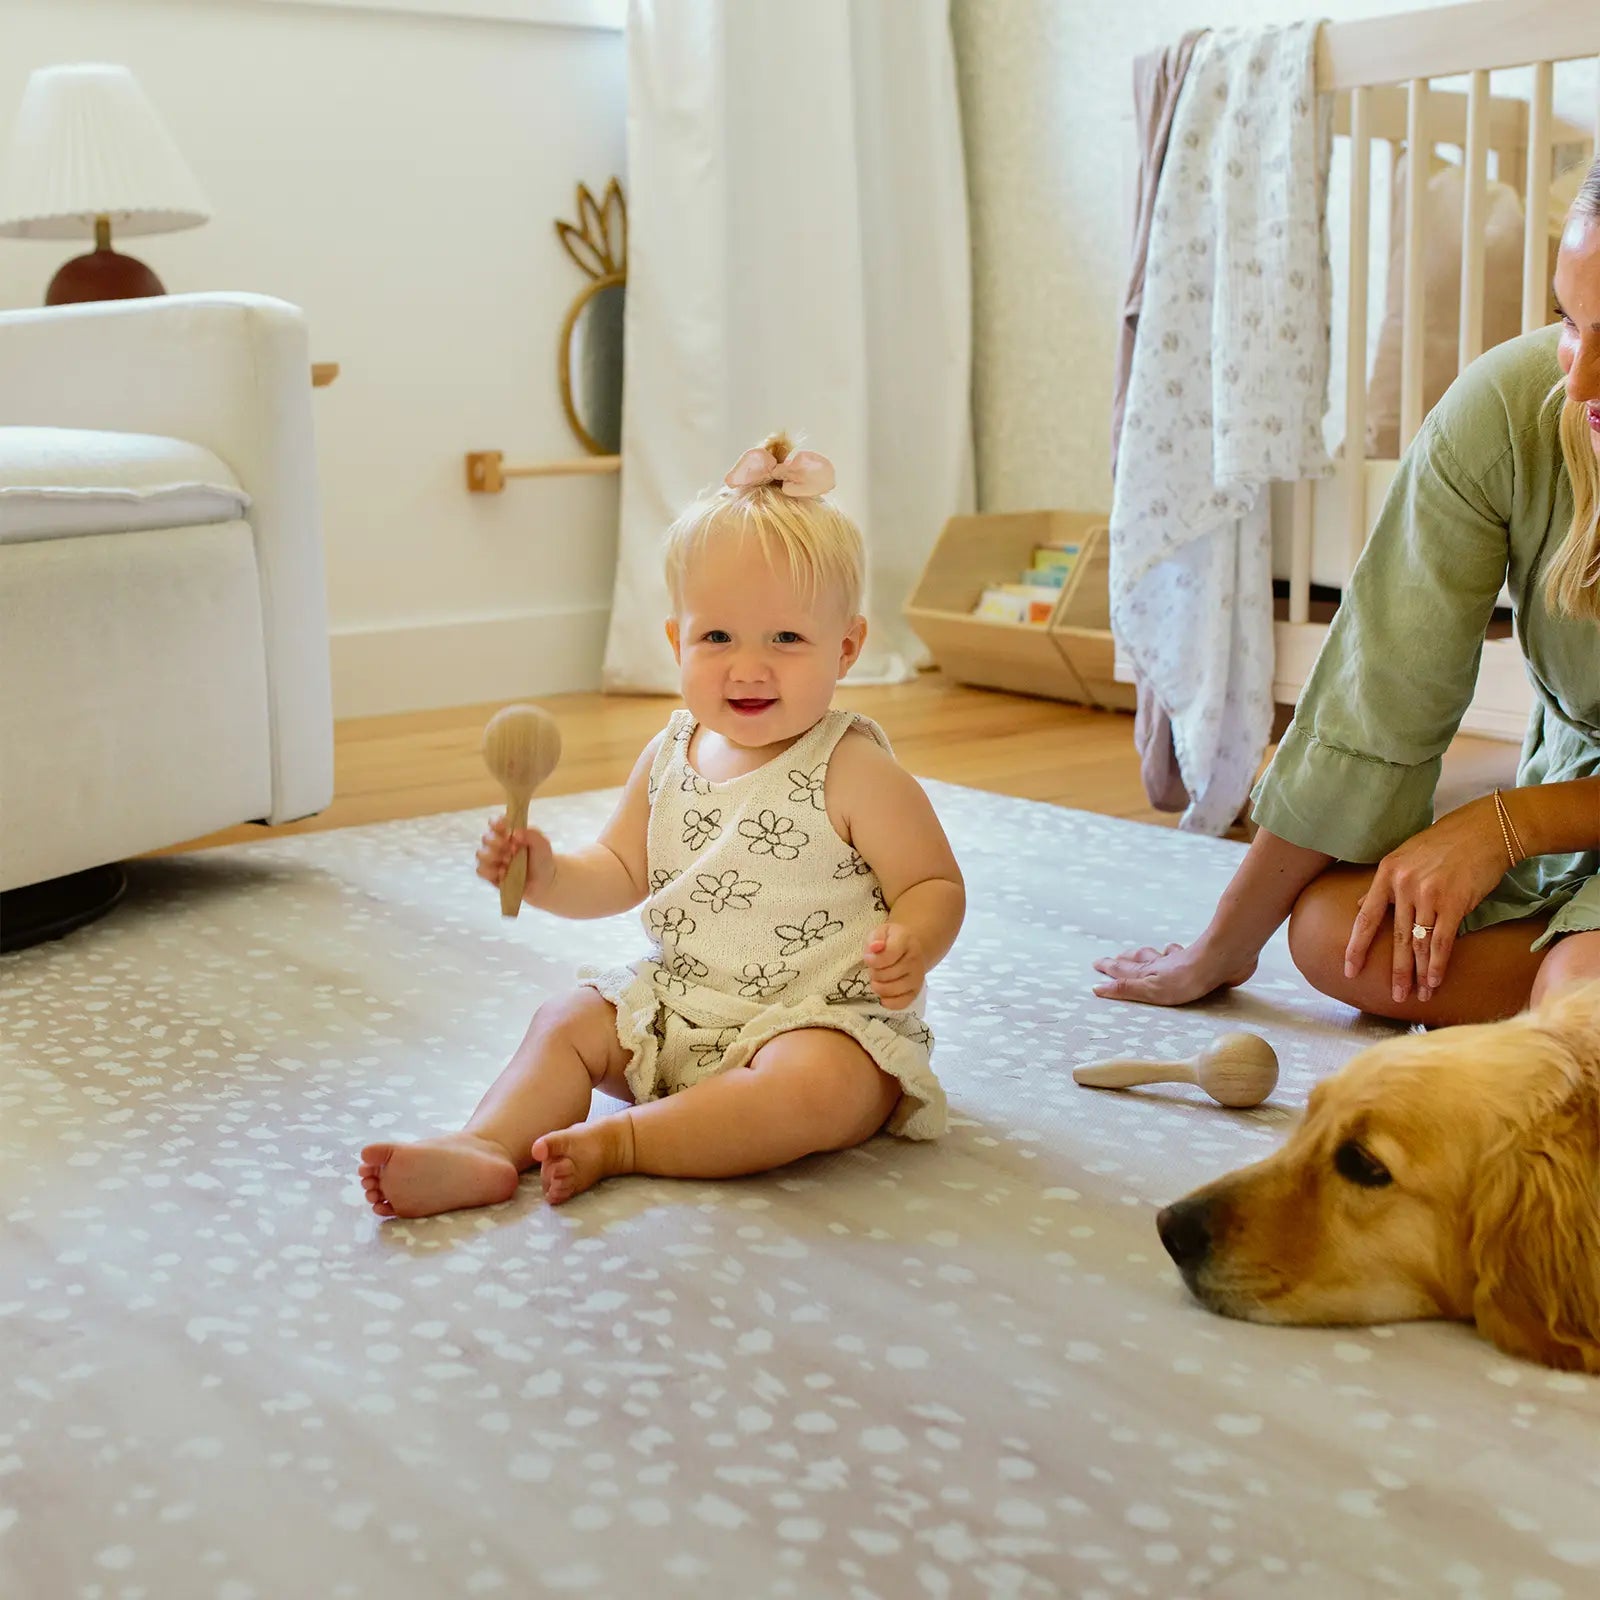 Fawn neutral beige animal print baby play mat shown in nursery with mom, dog, and baby playing with toys.